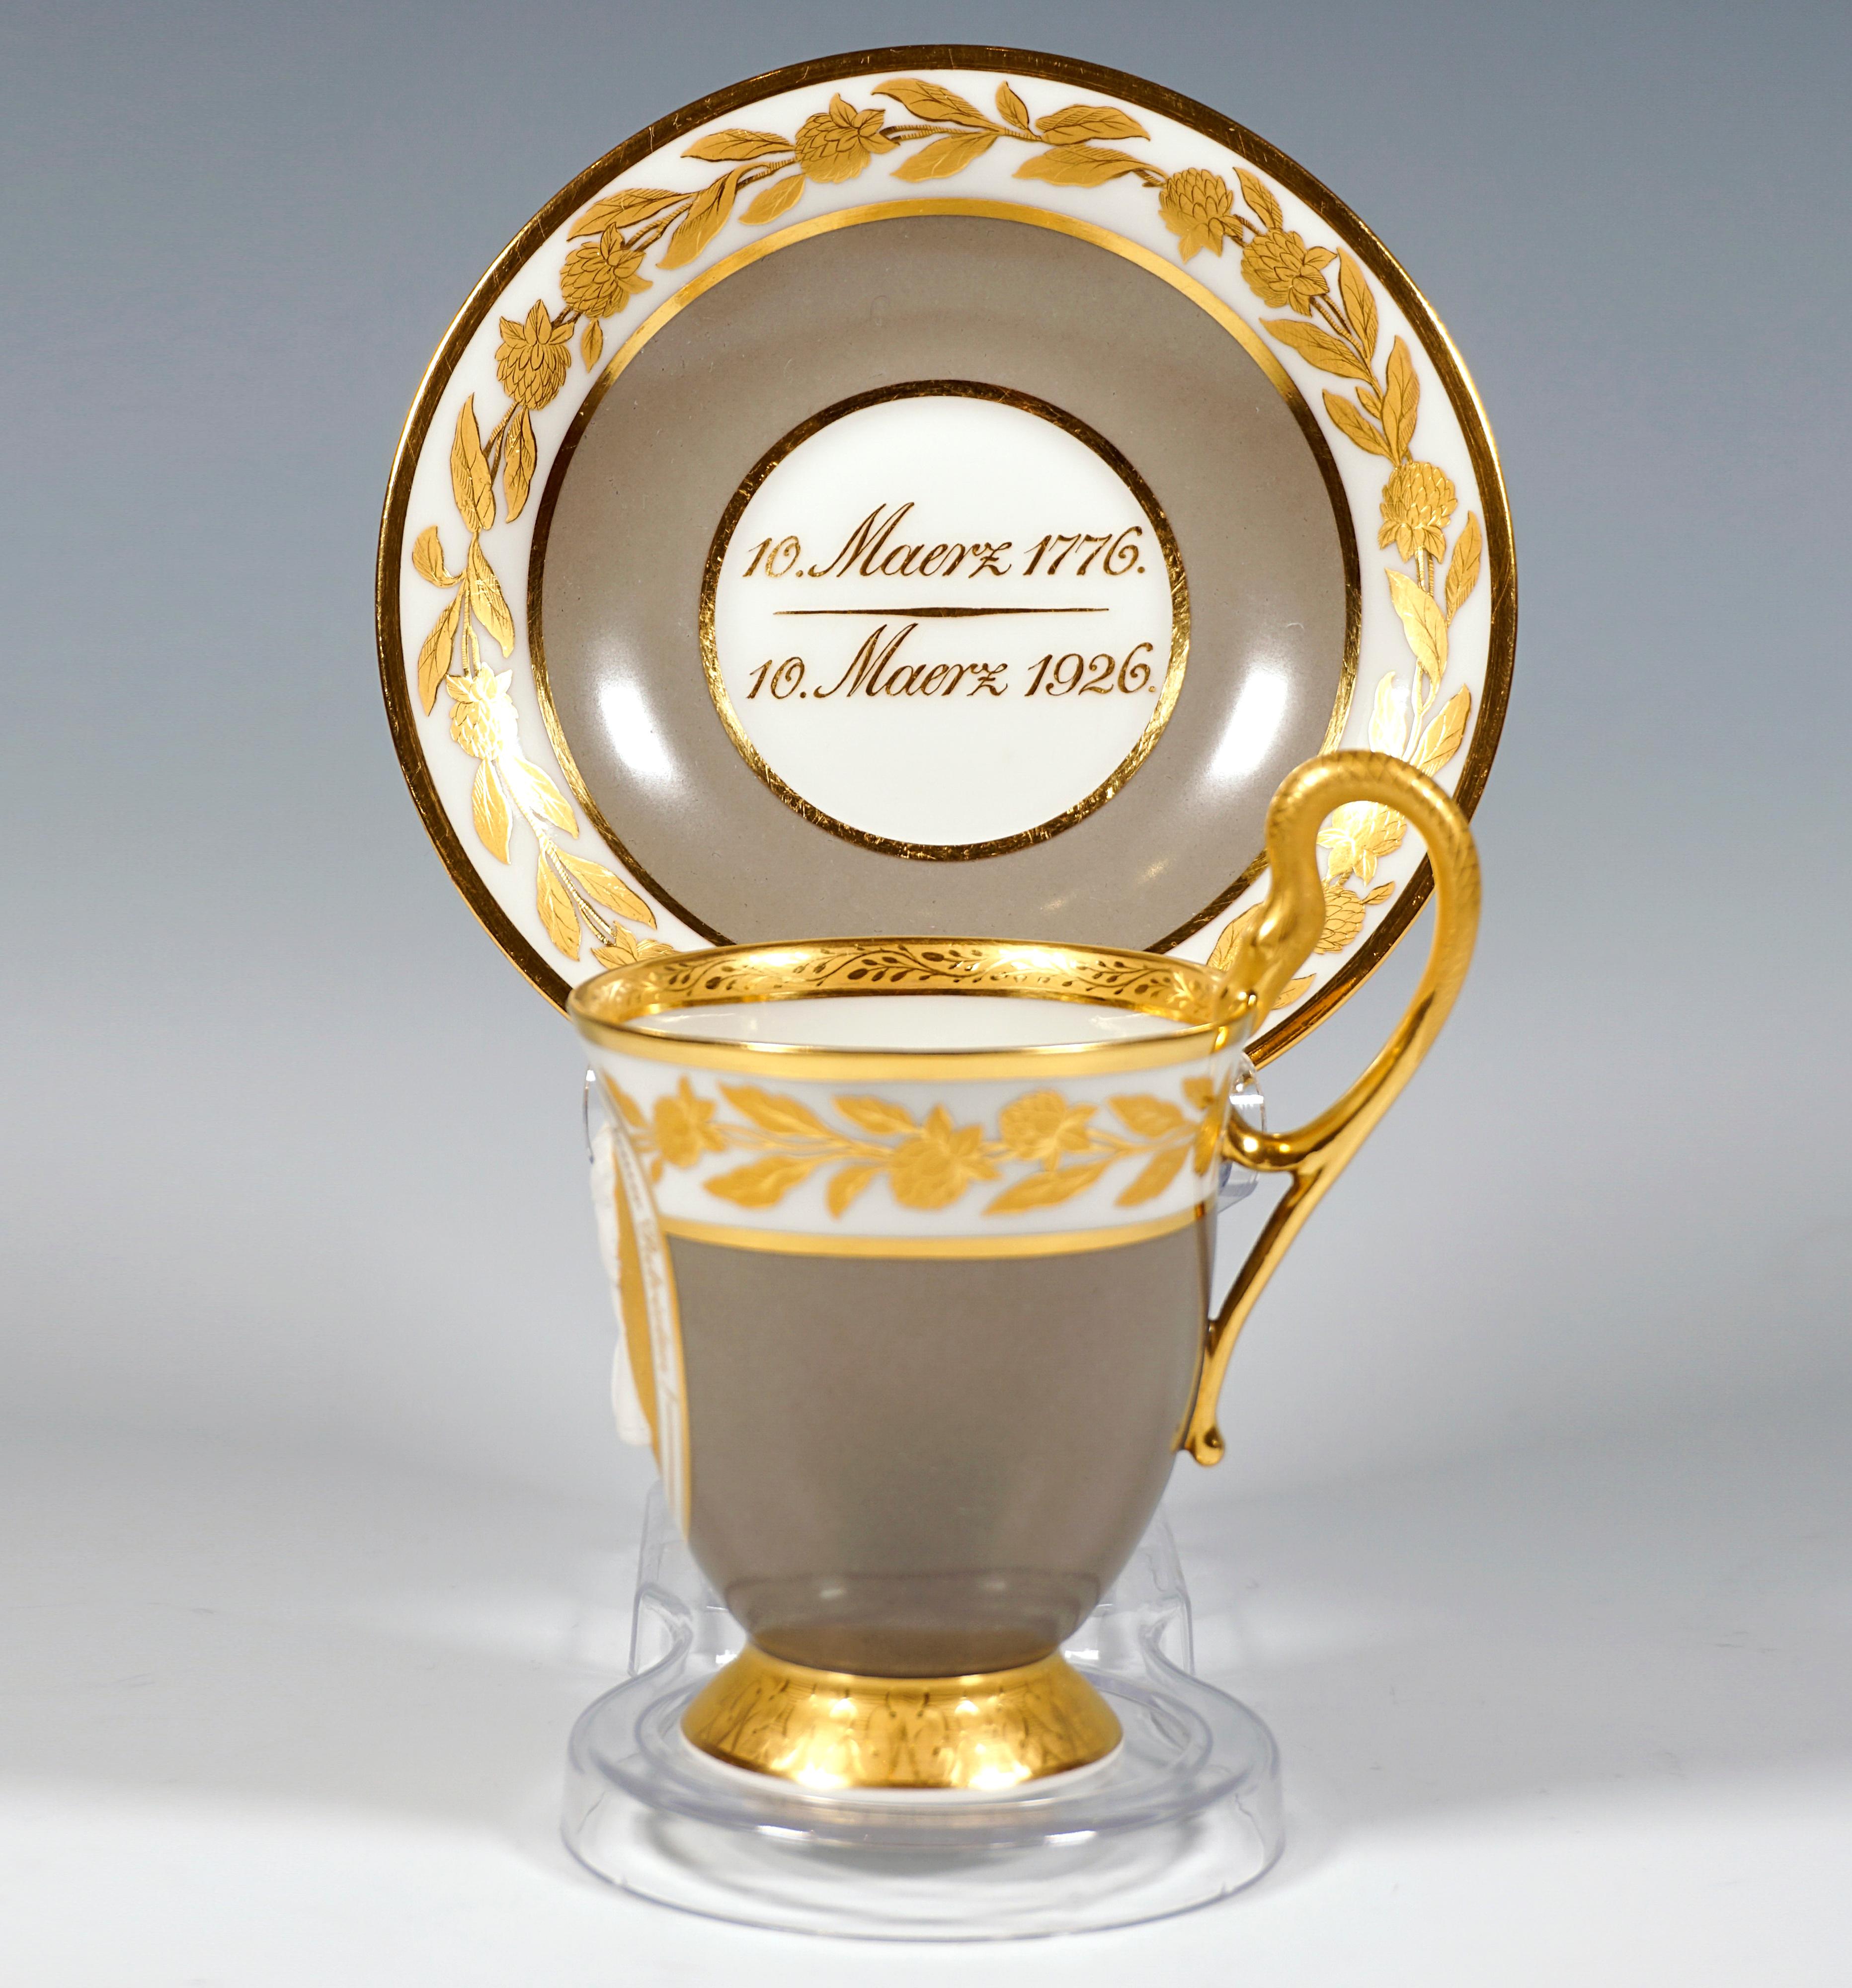 'She lives forever in the hearts of loyal patriots'
Porcelain cup with bust of Queen Louise and saucer: Cup with bell-shaped wall, the inside with a leaf border painted in matt and glossy gold, the outside ending at the top with gold rims with a